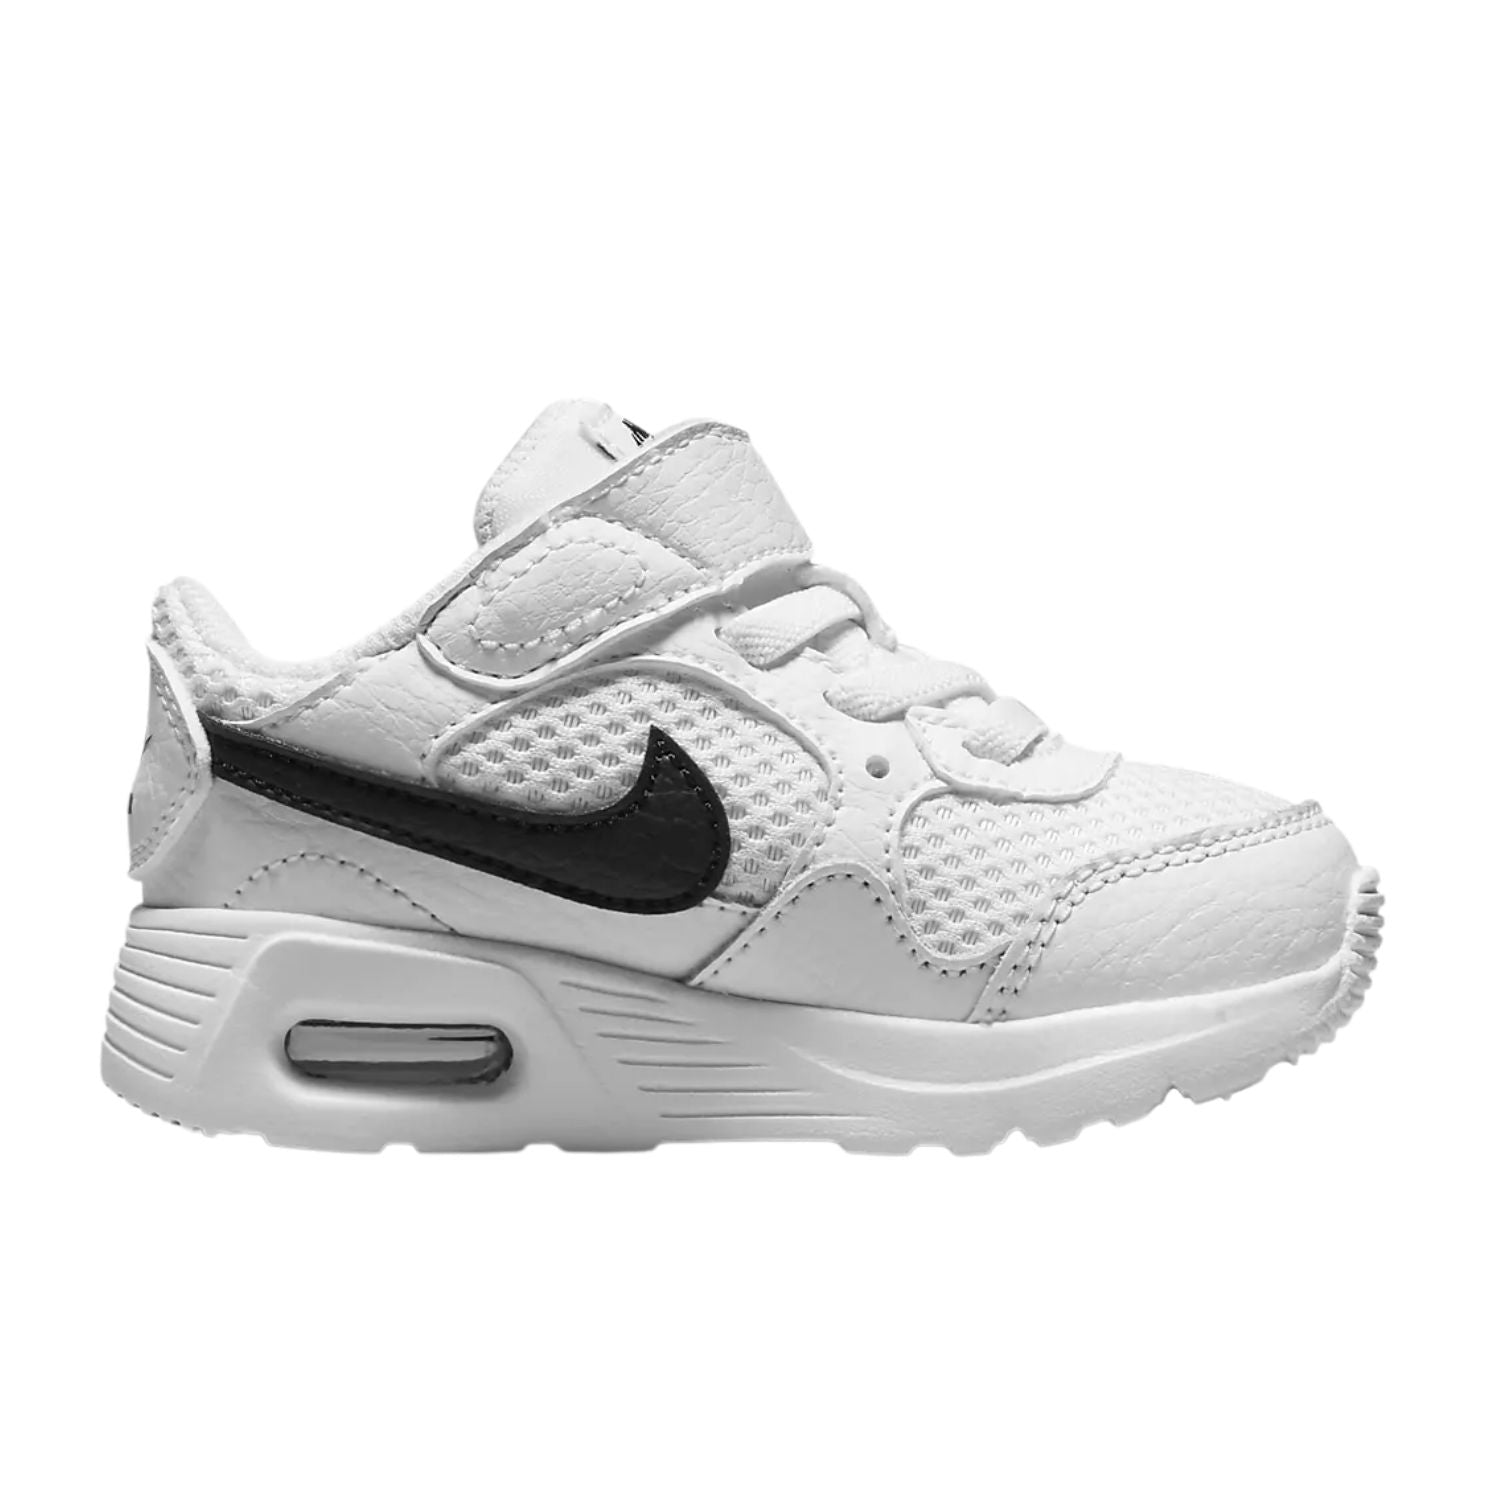 Nike Air Max Sc Toddlers Style : Cz5361-102